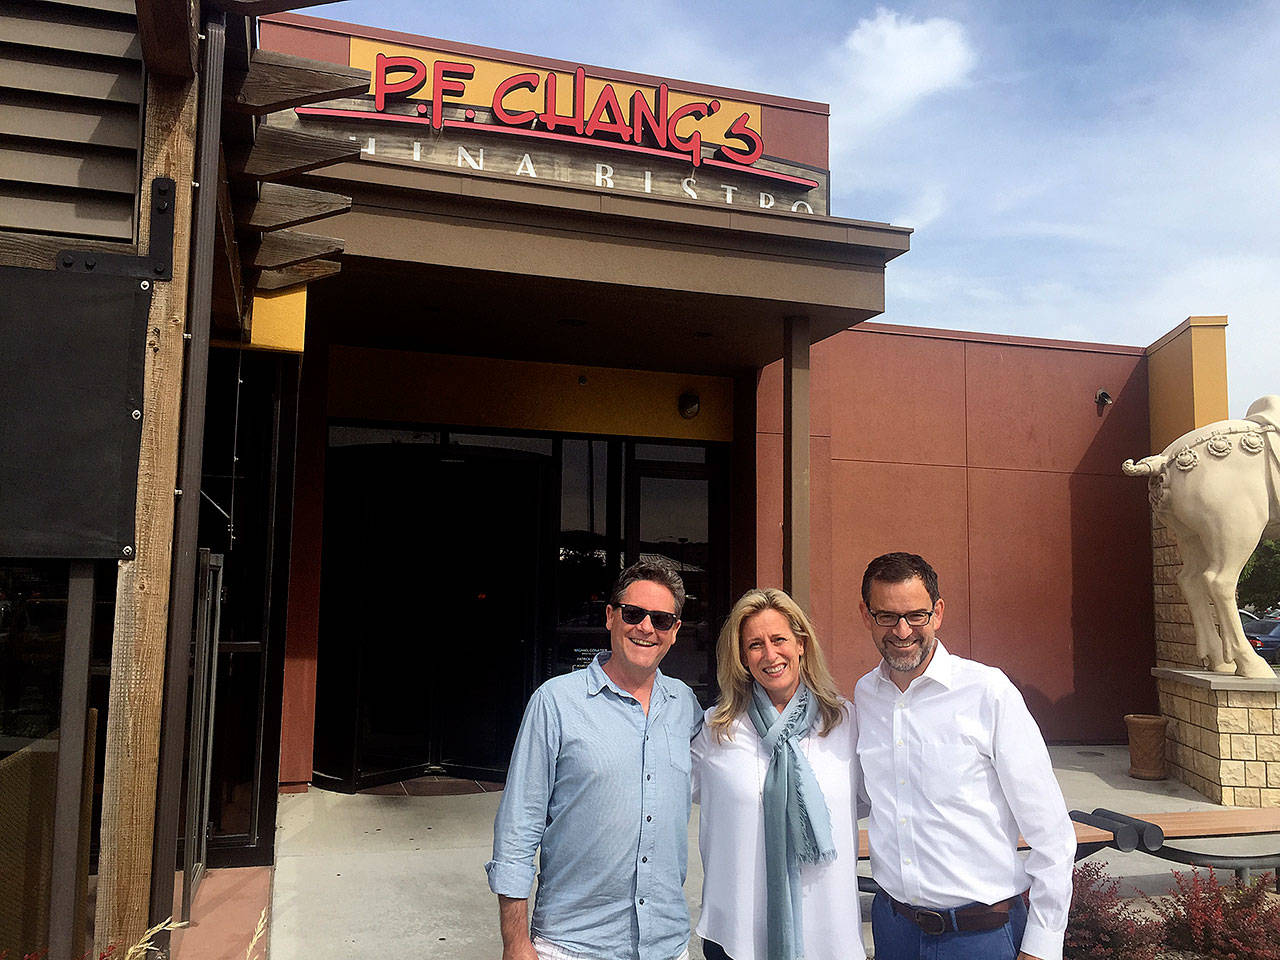 Winemaker John Freeman stands with Mary Melton of P.F. Chang’s and Precept CEO Andrew Browne in front of P.F. Chang’s China Bistro in Kennewick, Washington. (Andy Perdue/Great Northwest Wine)